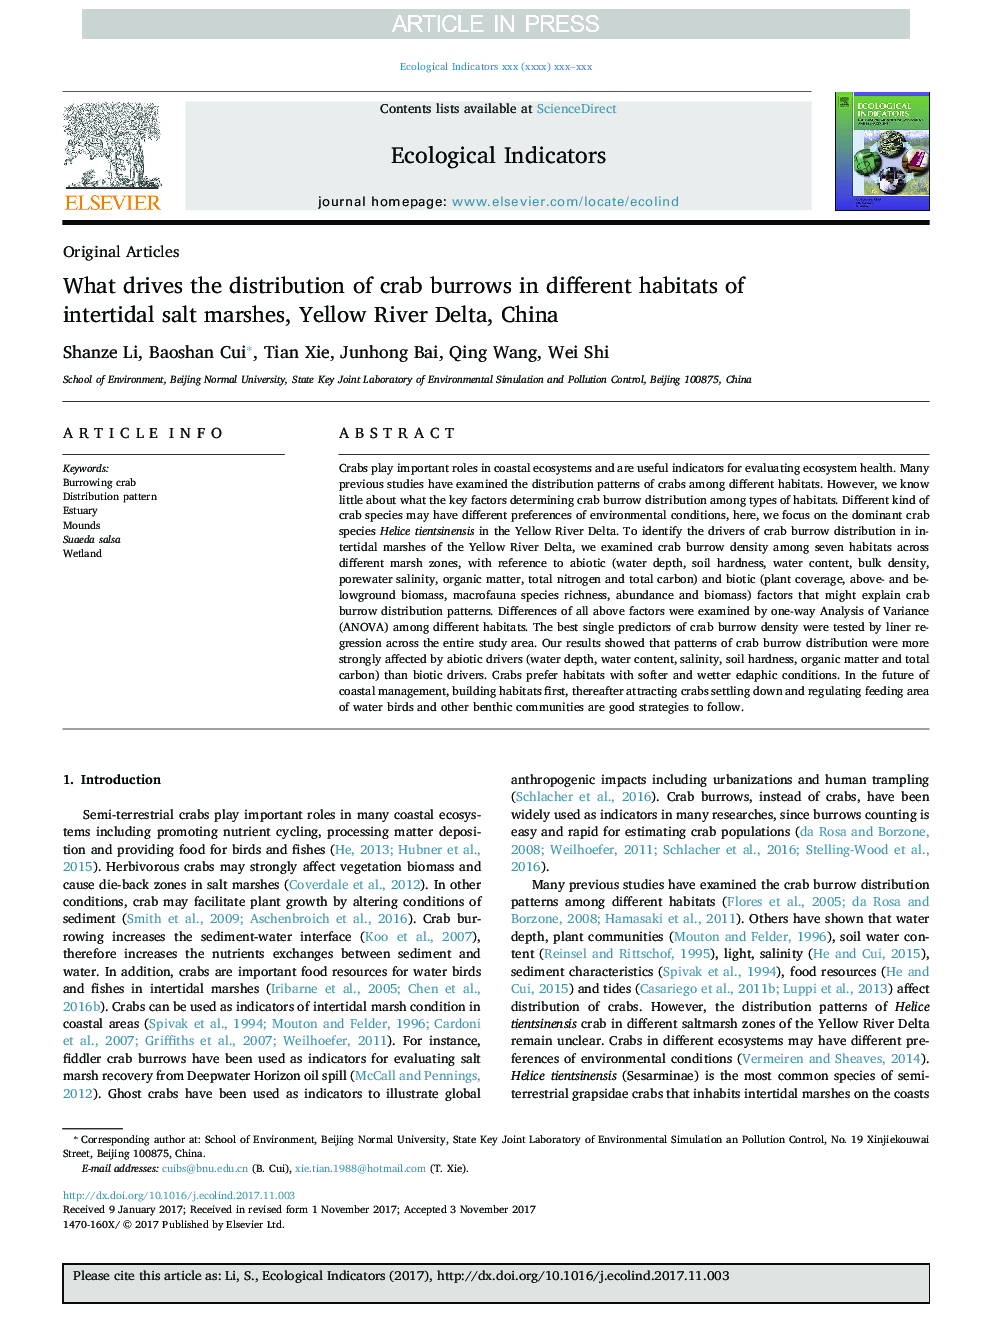 What drives the distribution of crab burrows in different habitats of intertidal salt marshes, Yellow River Delta, China